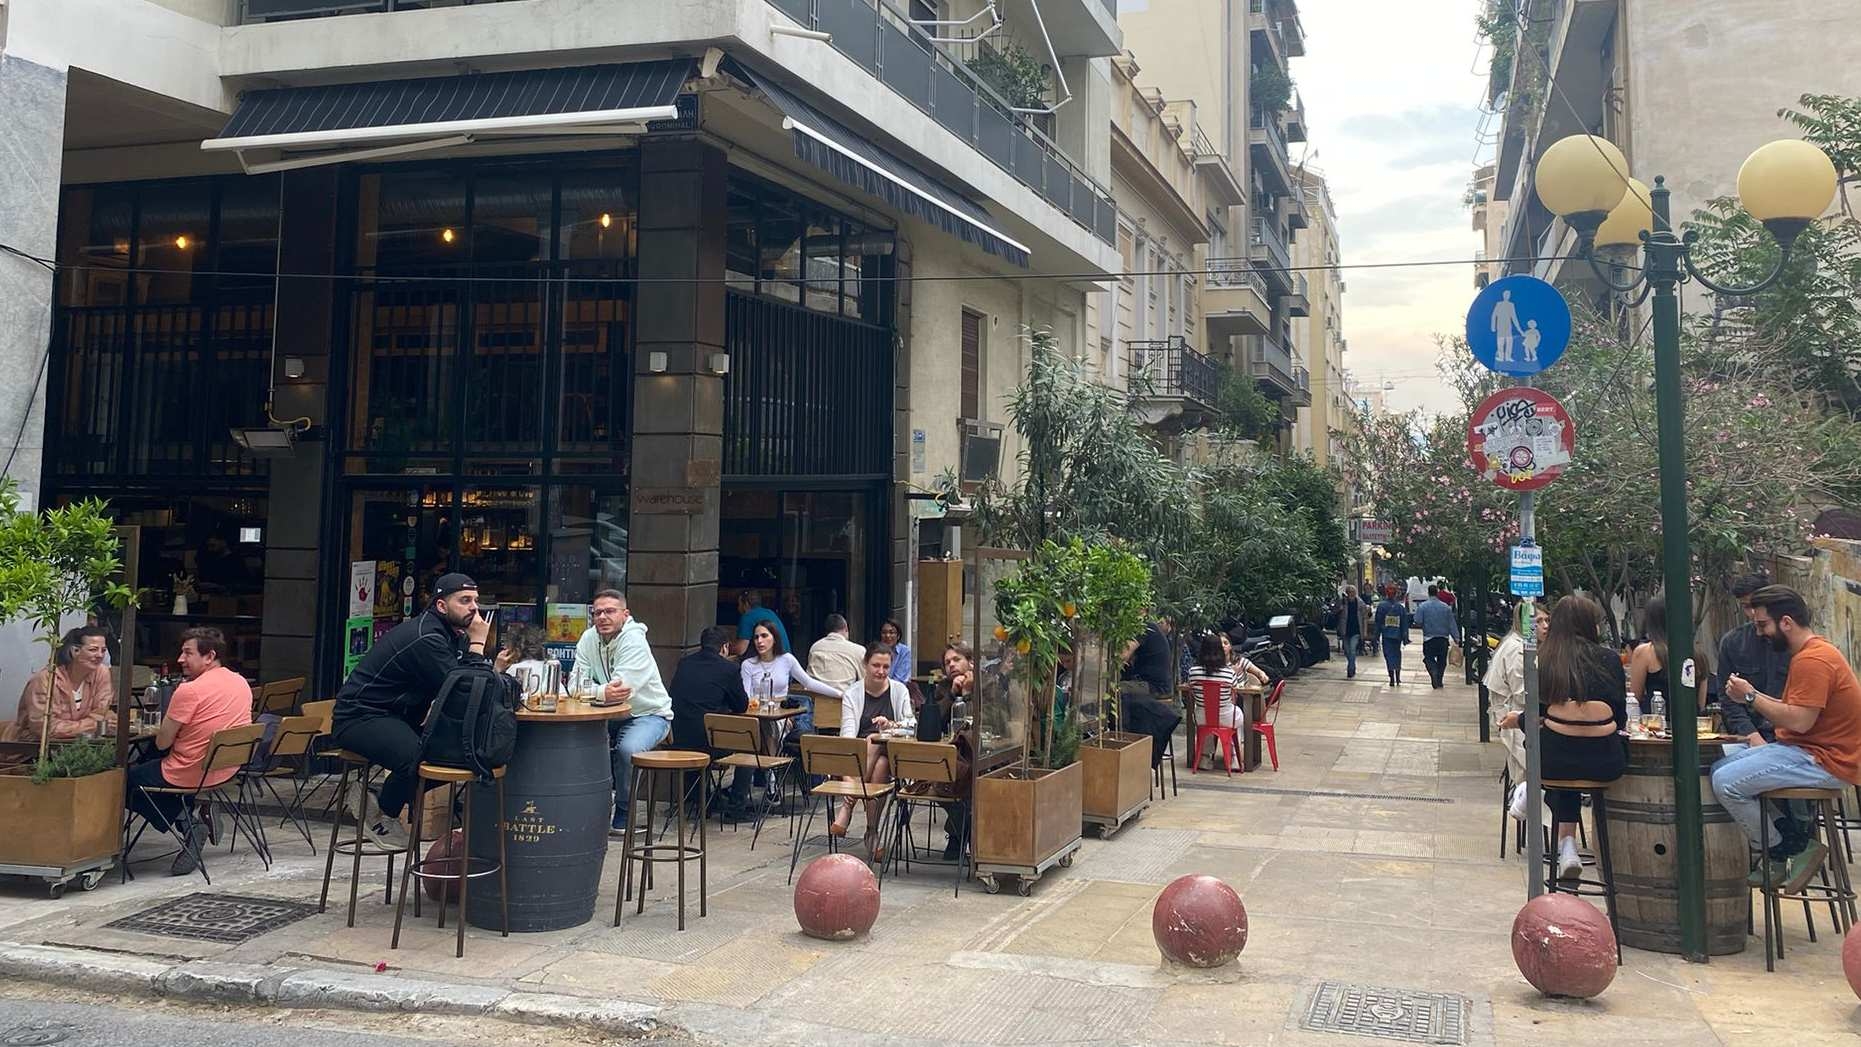 Athens, Greece has attracted Israelis with its low prices, proximity and more recently, status as a safe haven from domestic political chaos.